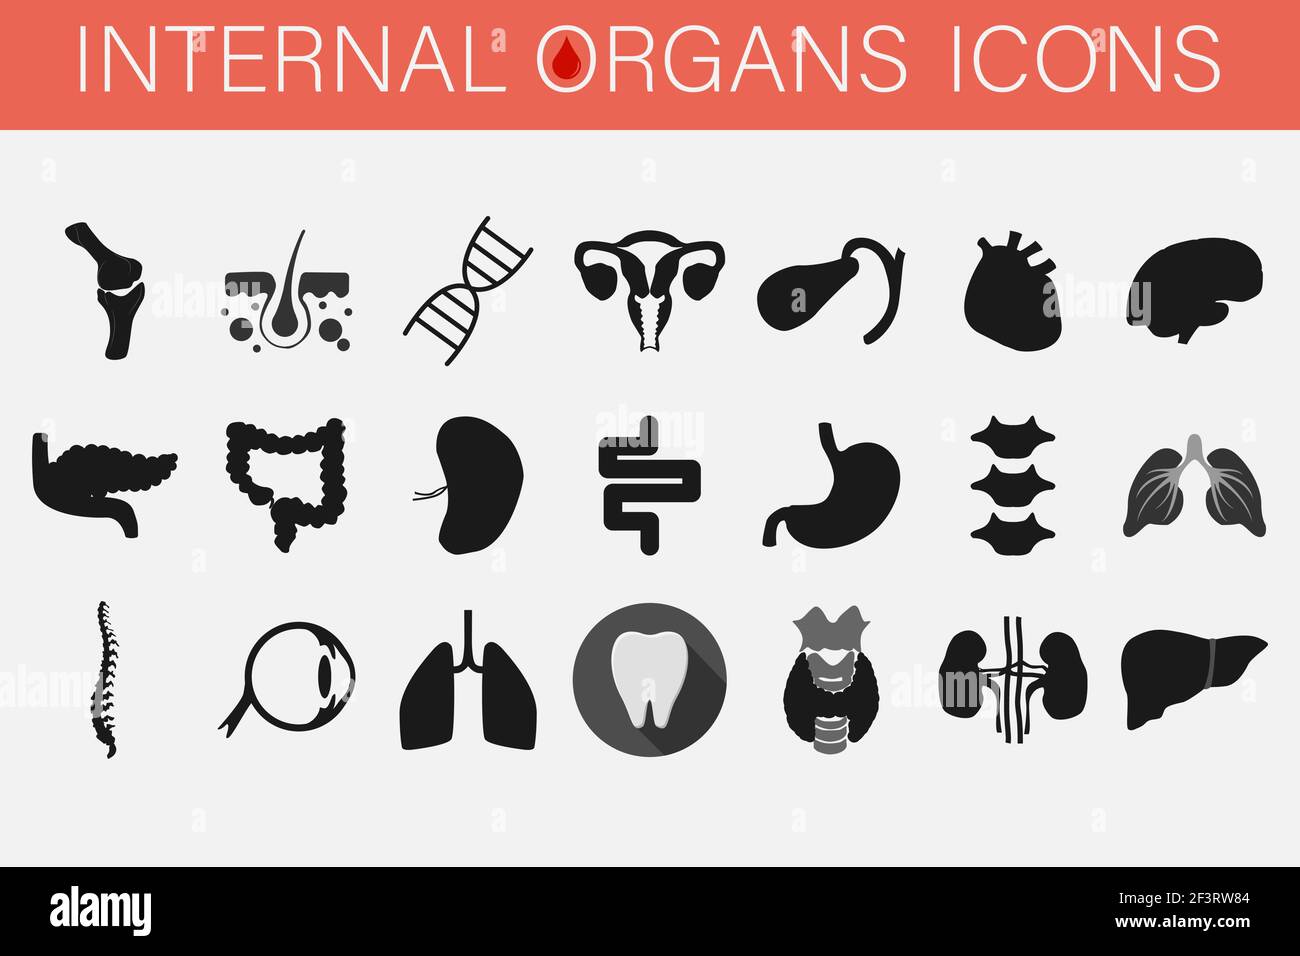 Set of icons of internal organs and parts of man. Stock Vector